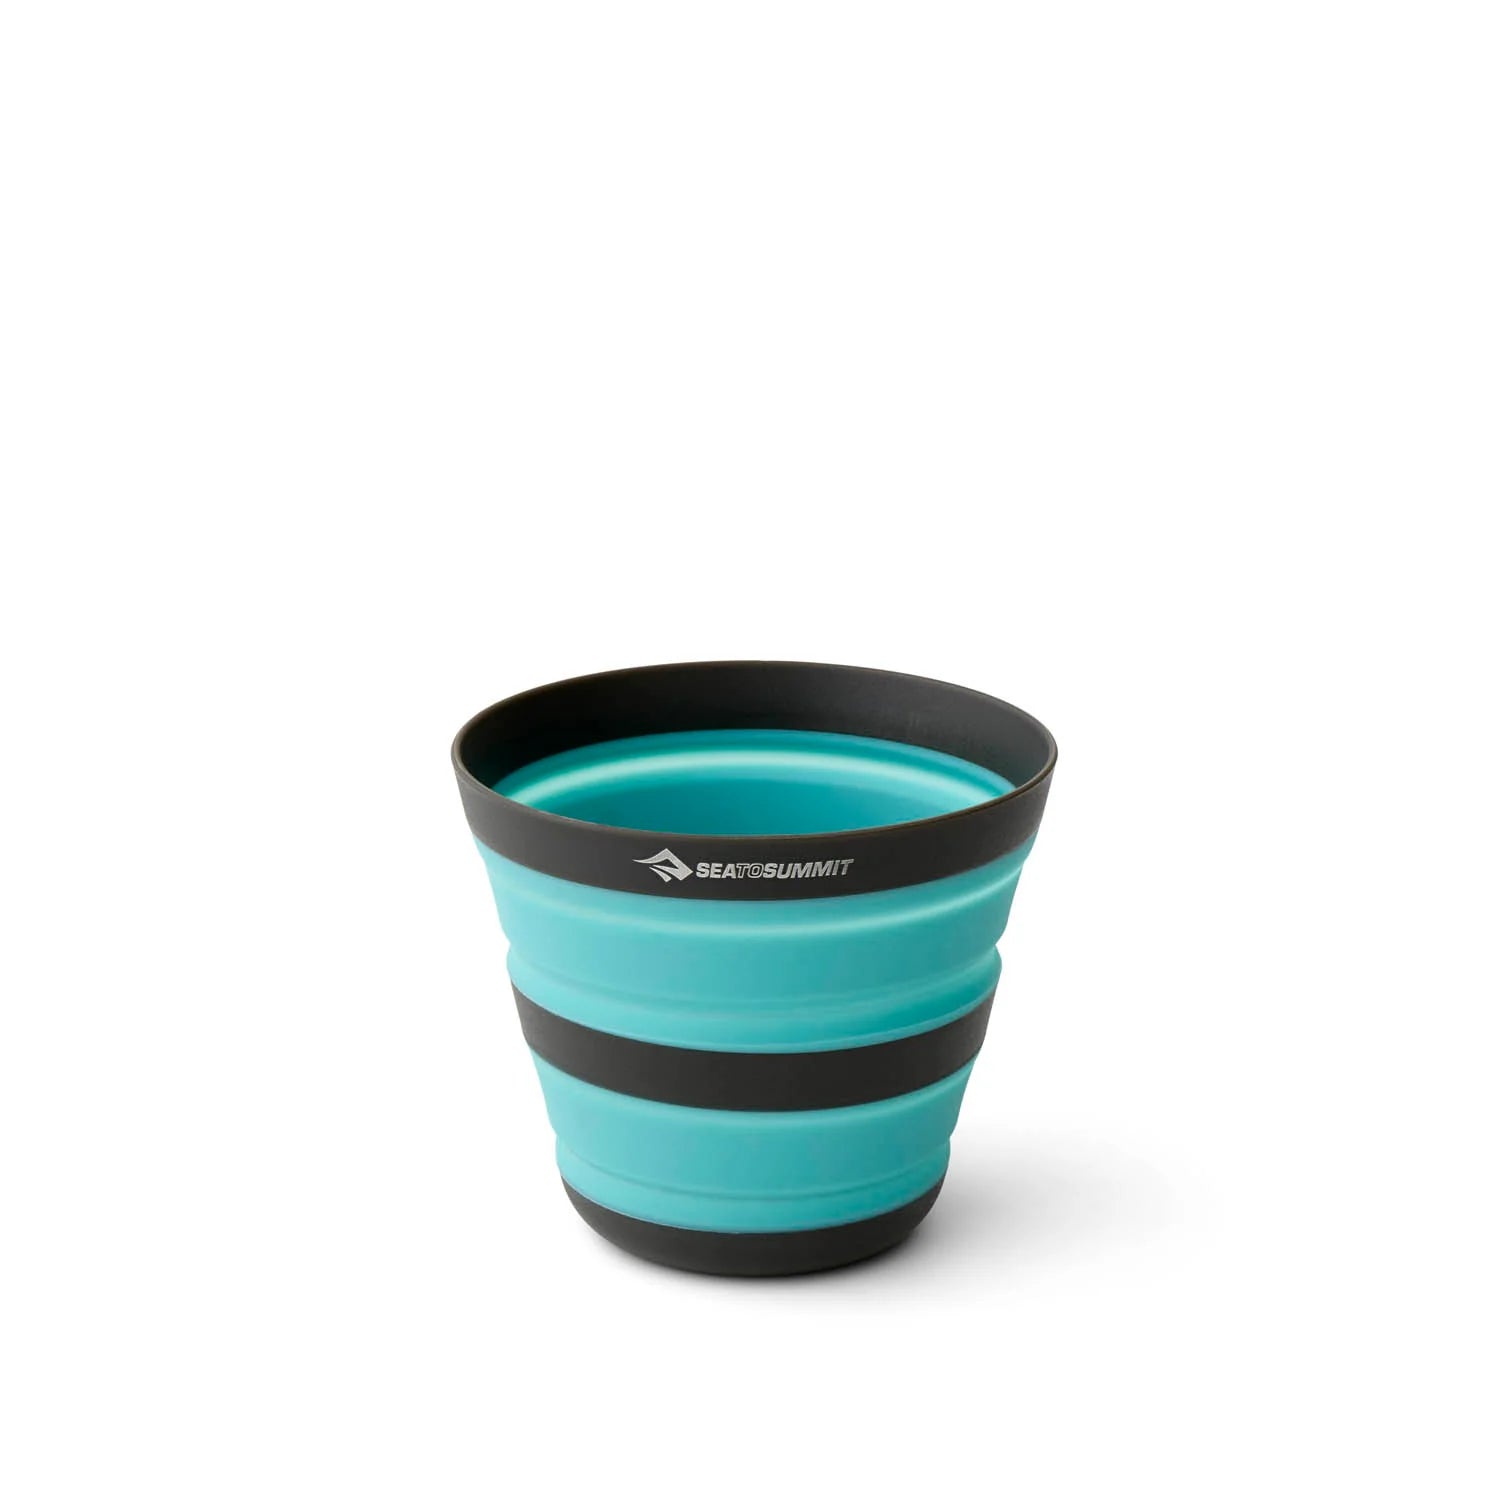 Sea to Summit Frontier UL Collapsible Cup - BLUE - Mansfield Hunting & Fishing - Products to prepare for Corona Virus